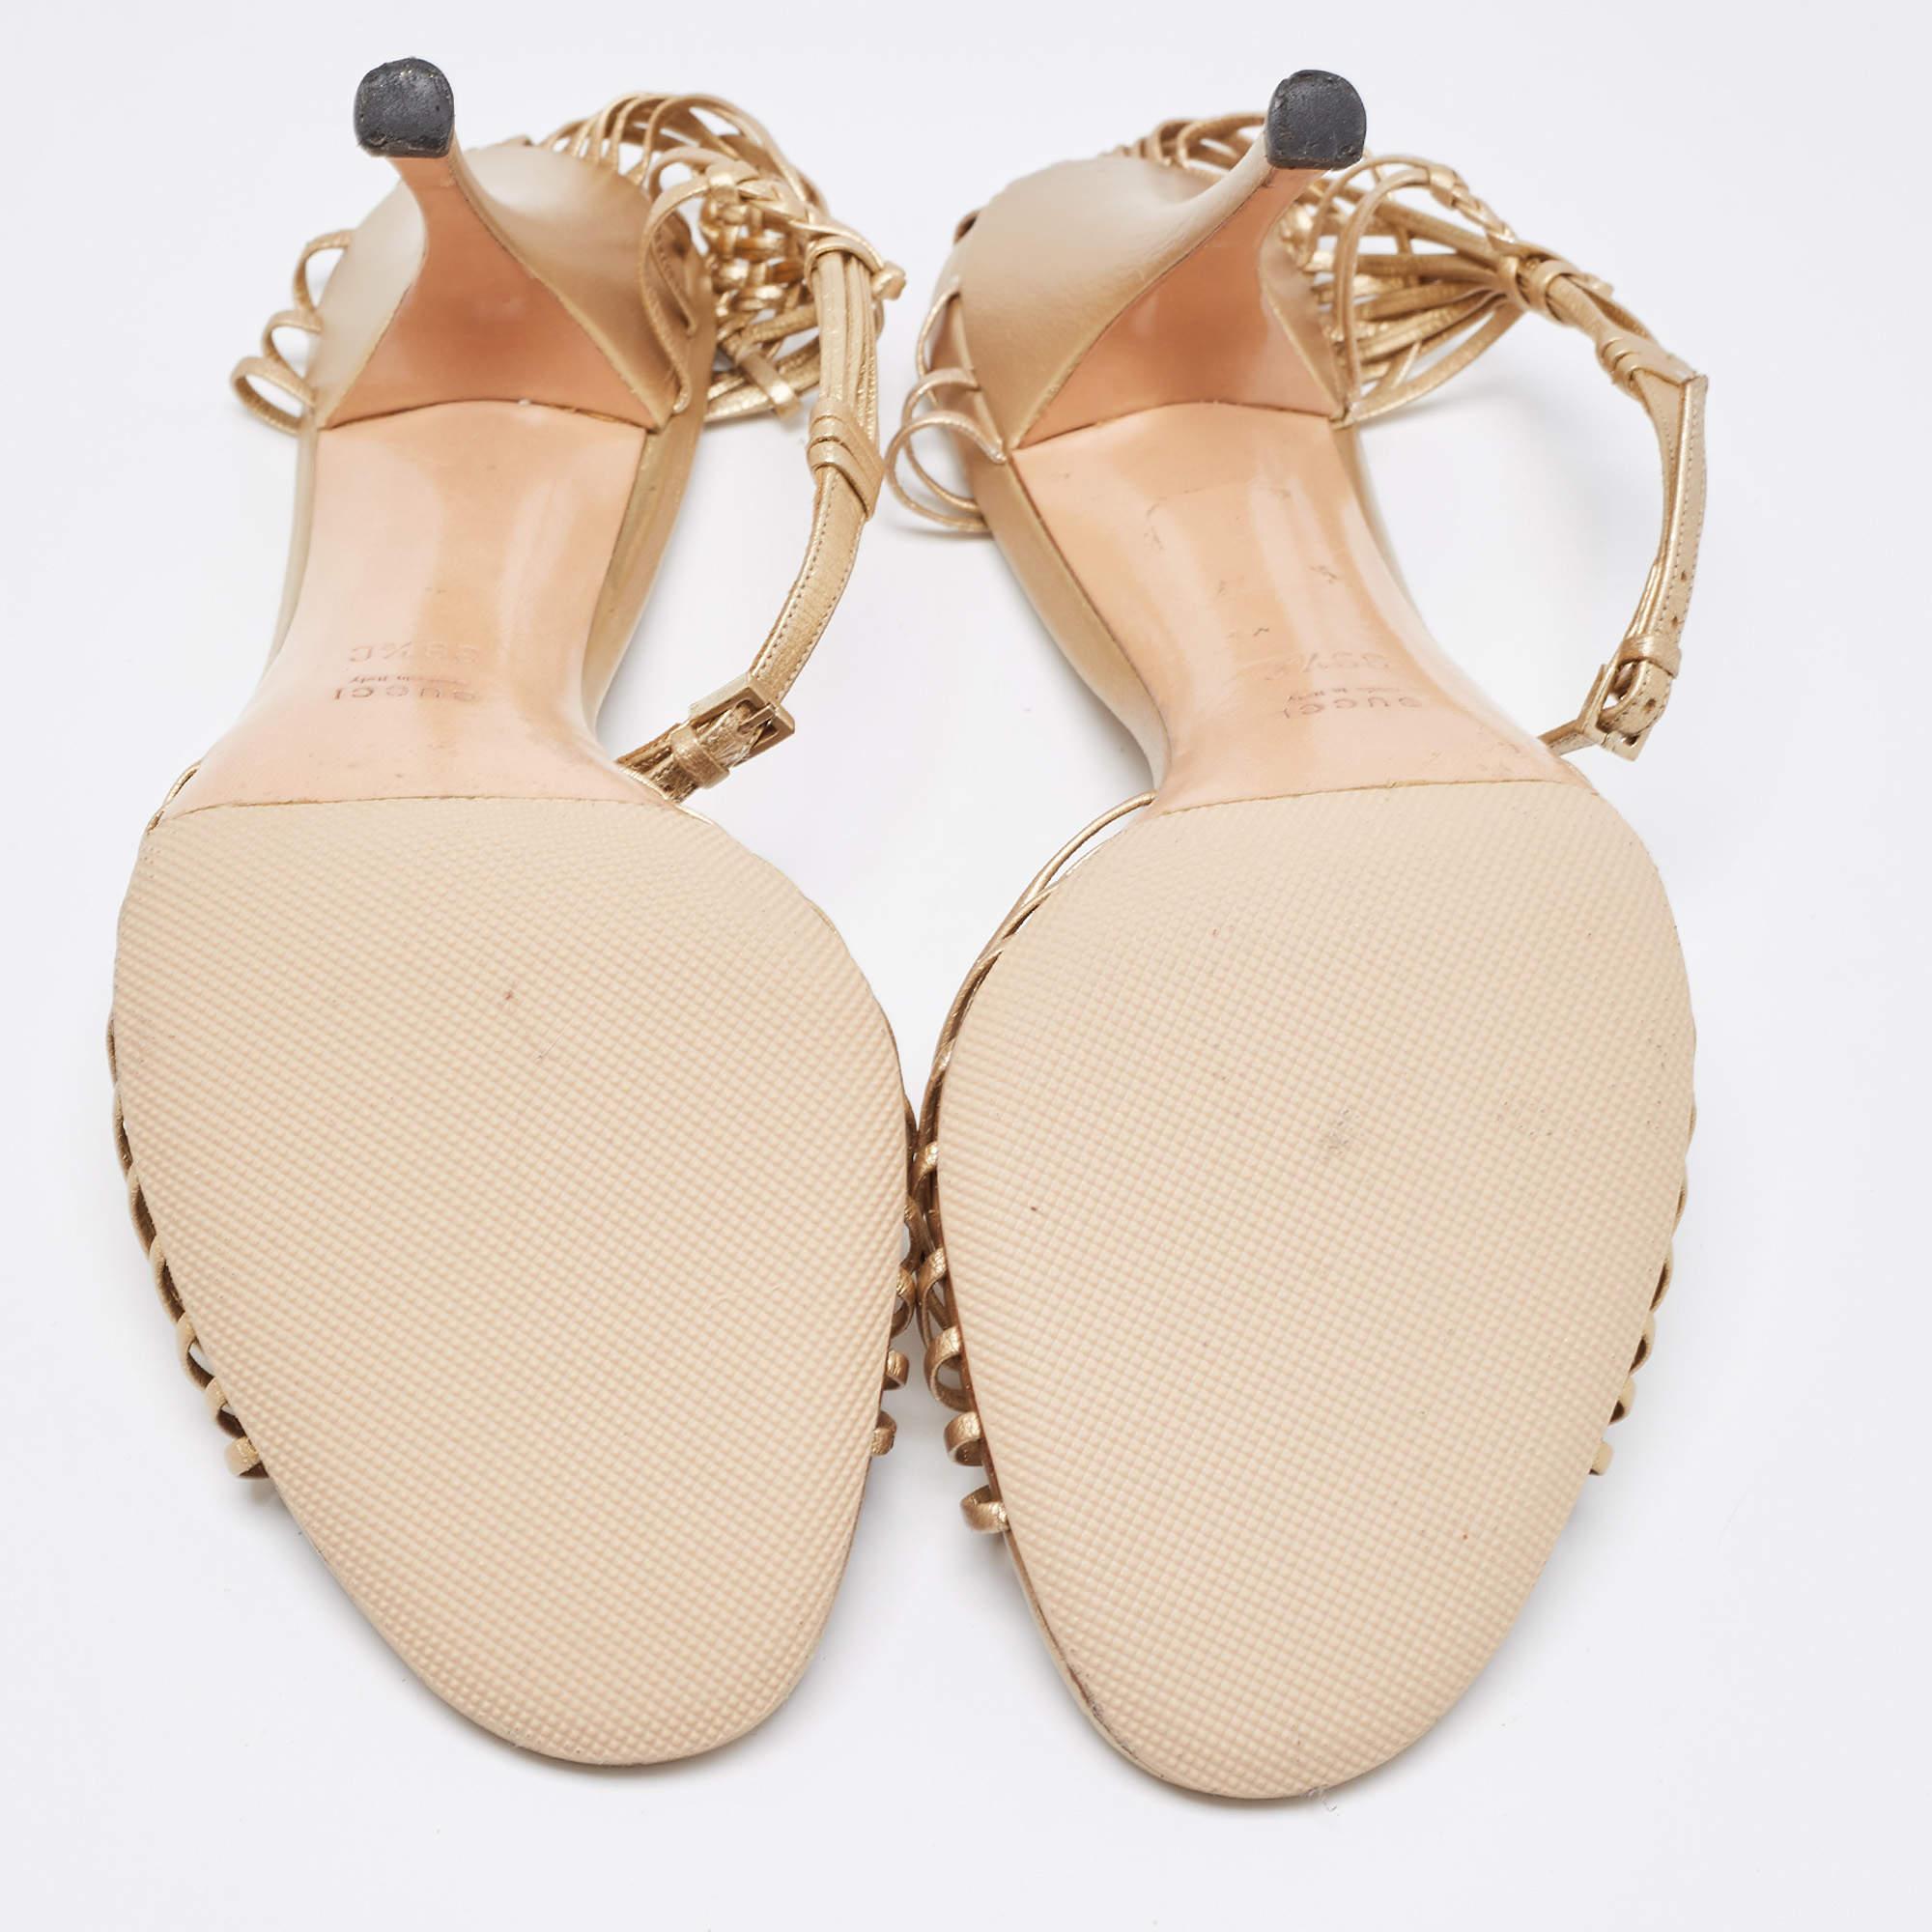 Gucci Gold Leather Ankle Strap Sandals Size 39.5 4